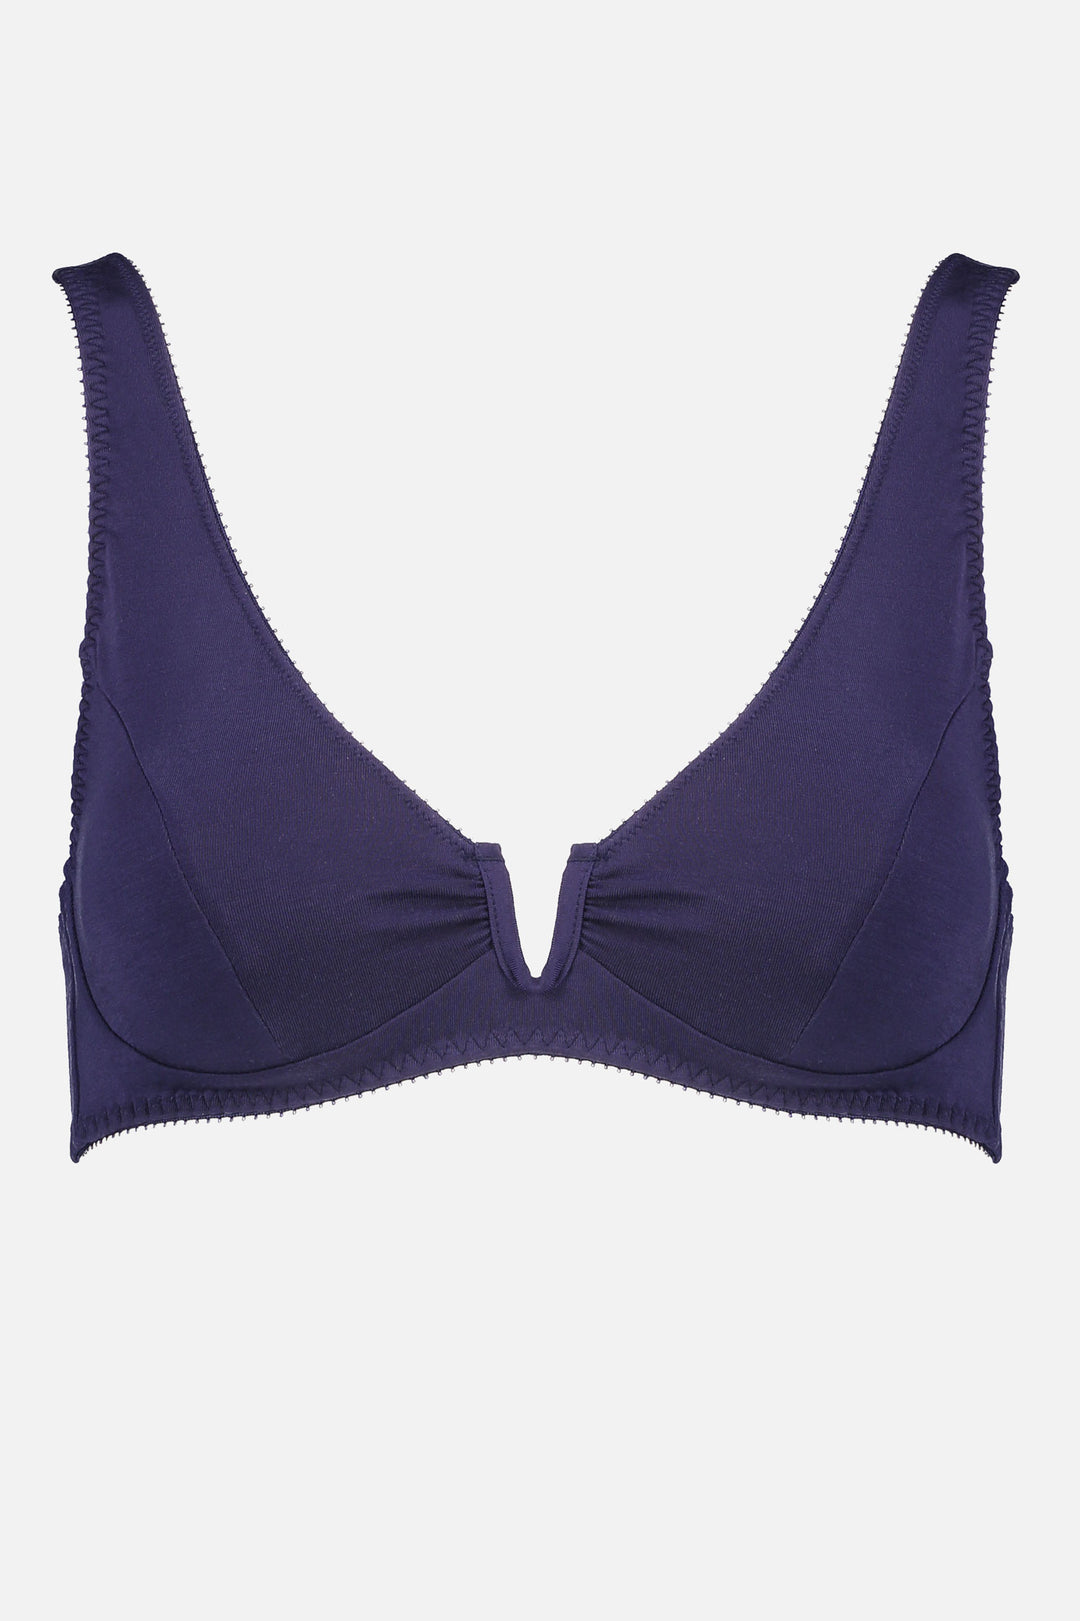 Videris Lingerie Sarah underwire free soft cup bra in navy TENCEL™ with a scooped plunge cup and front U wire